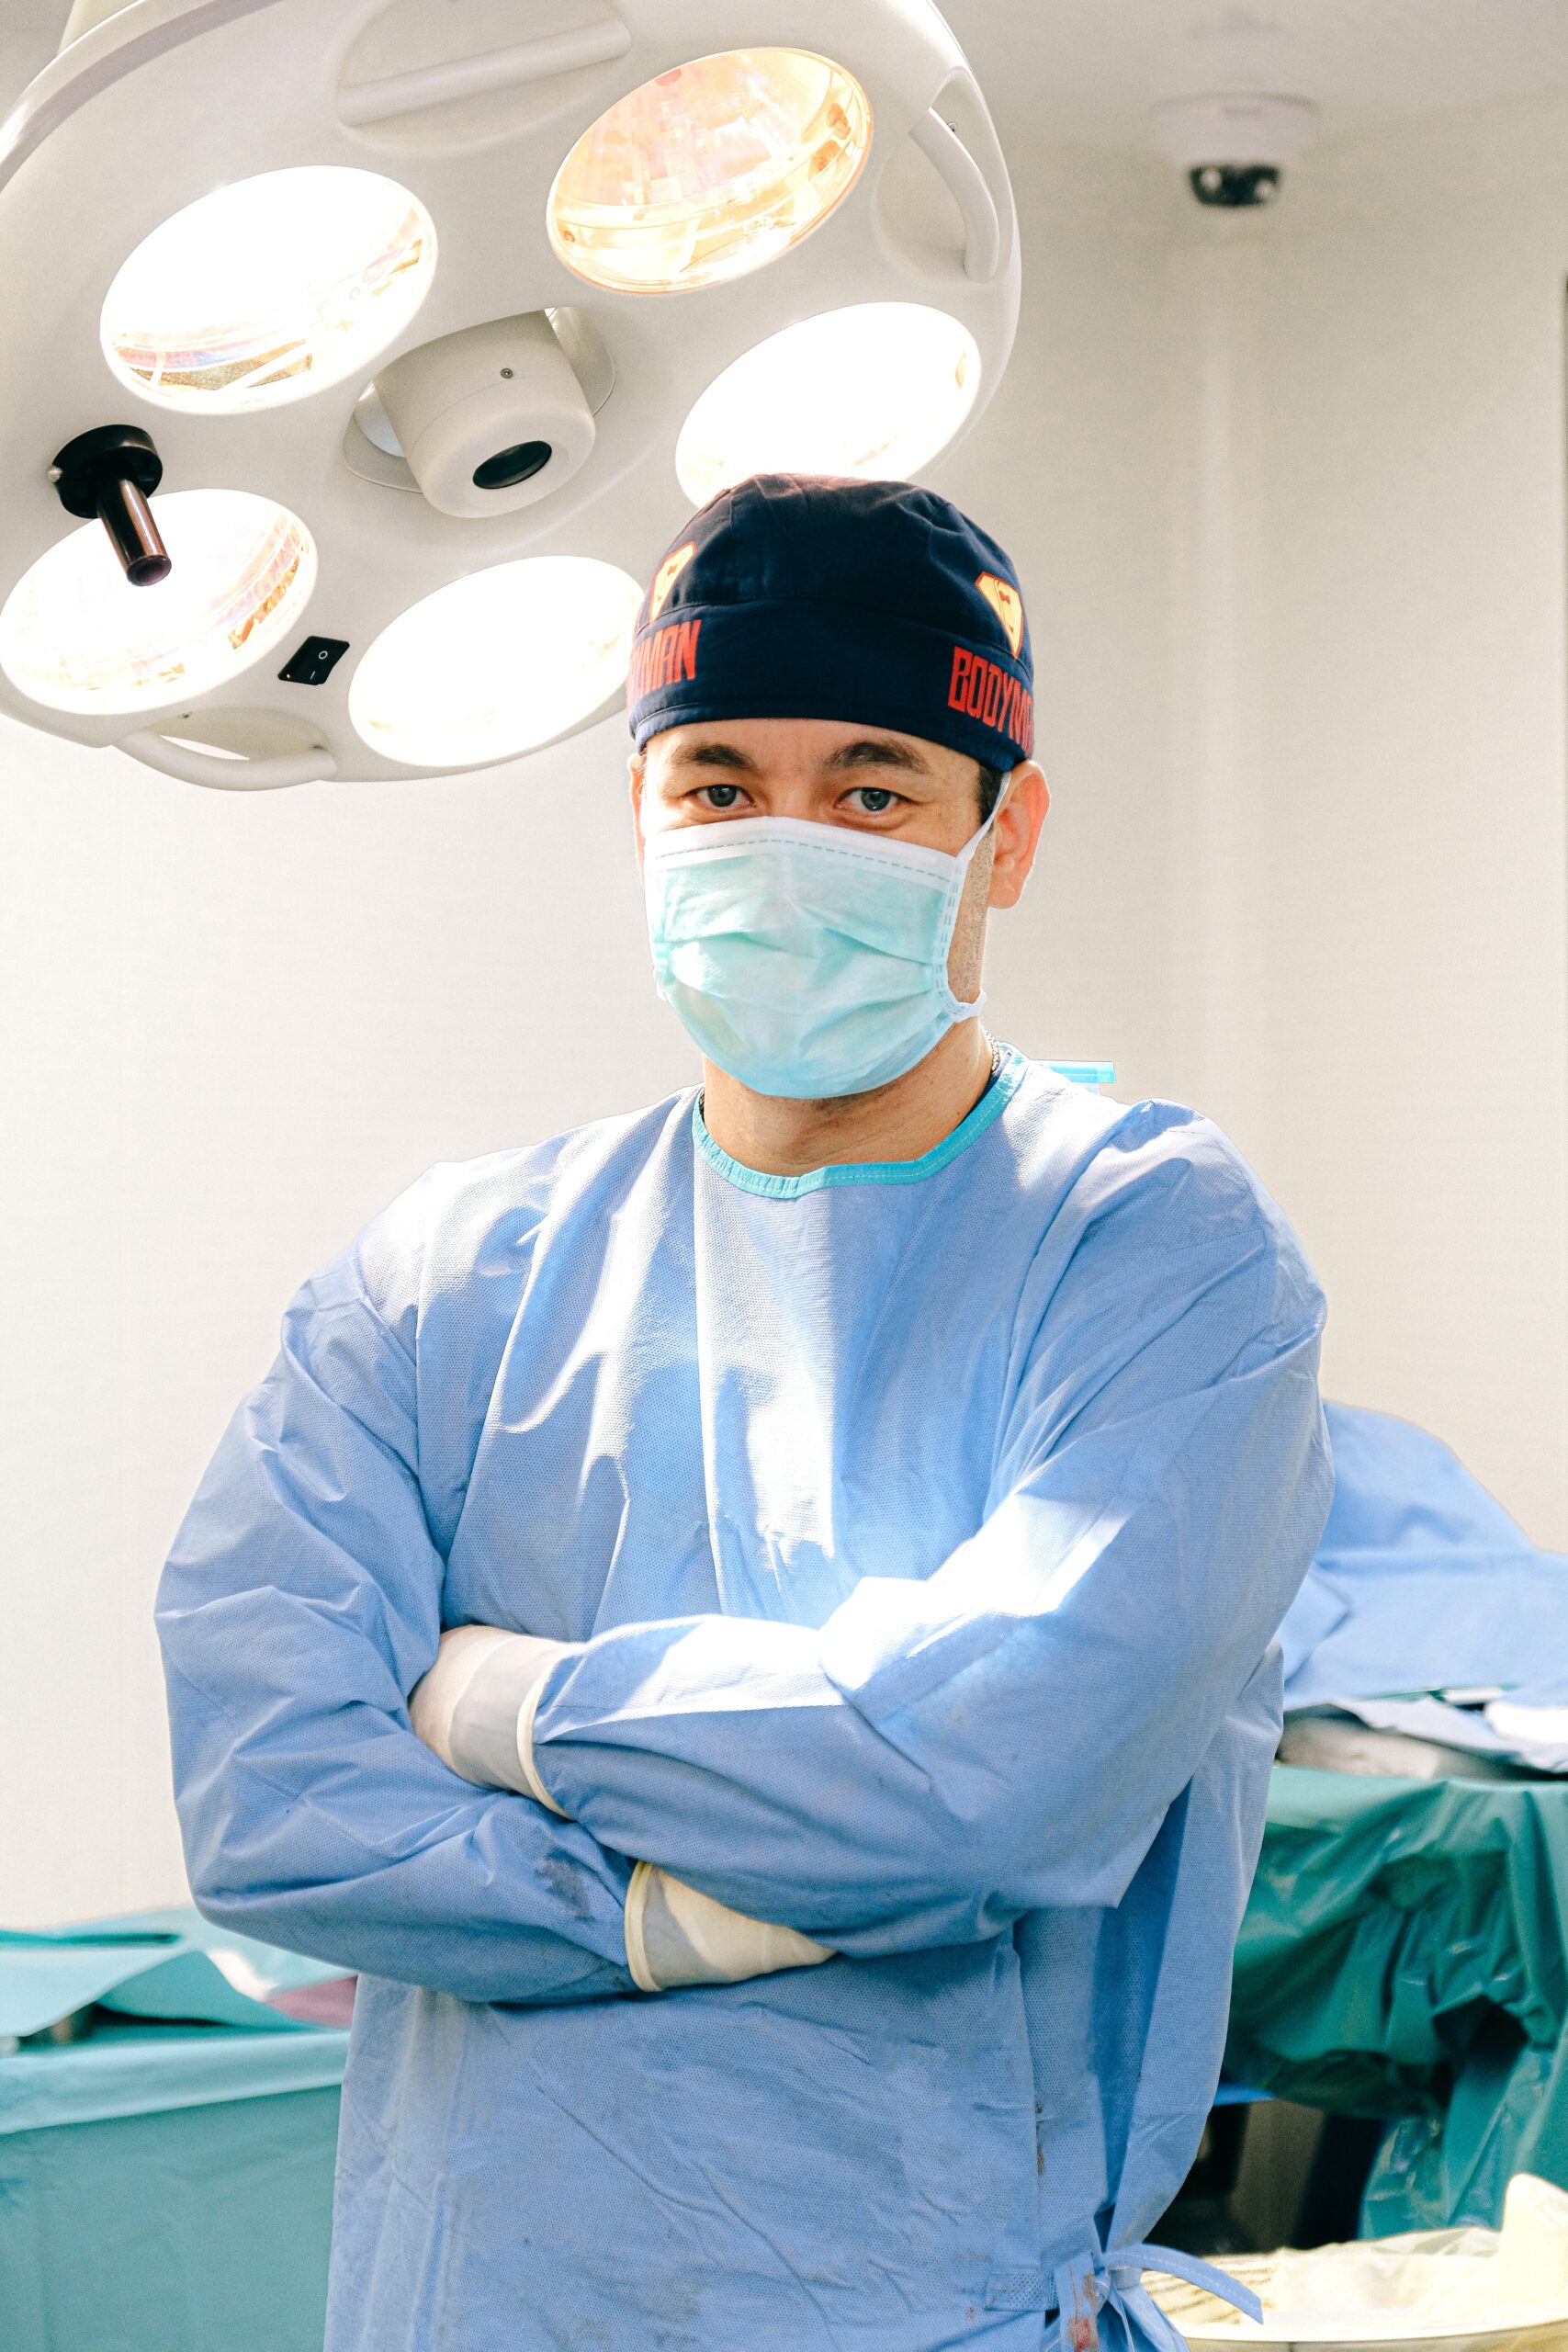 Surgeon In The Operating Room 3845127